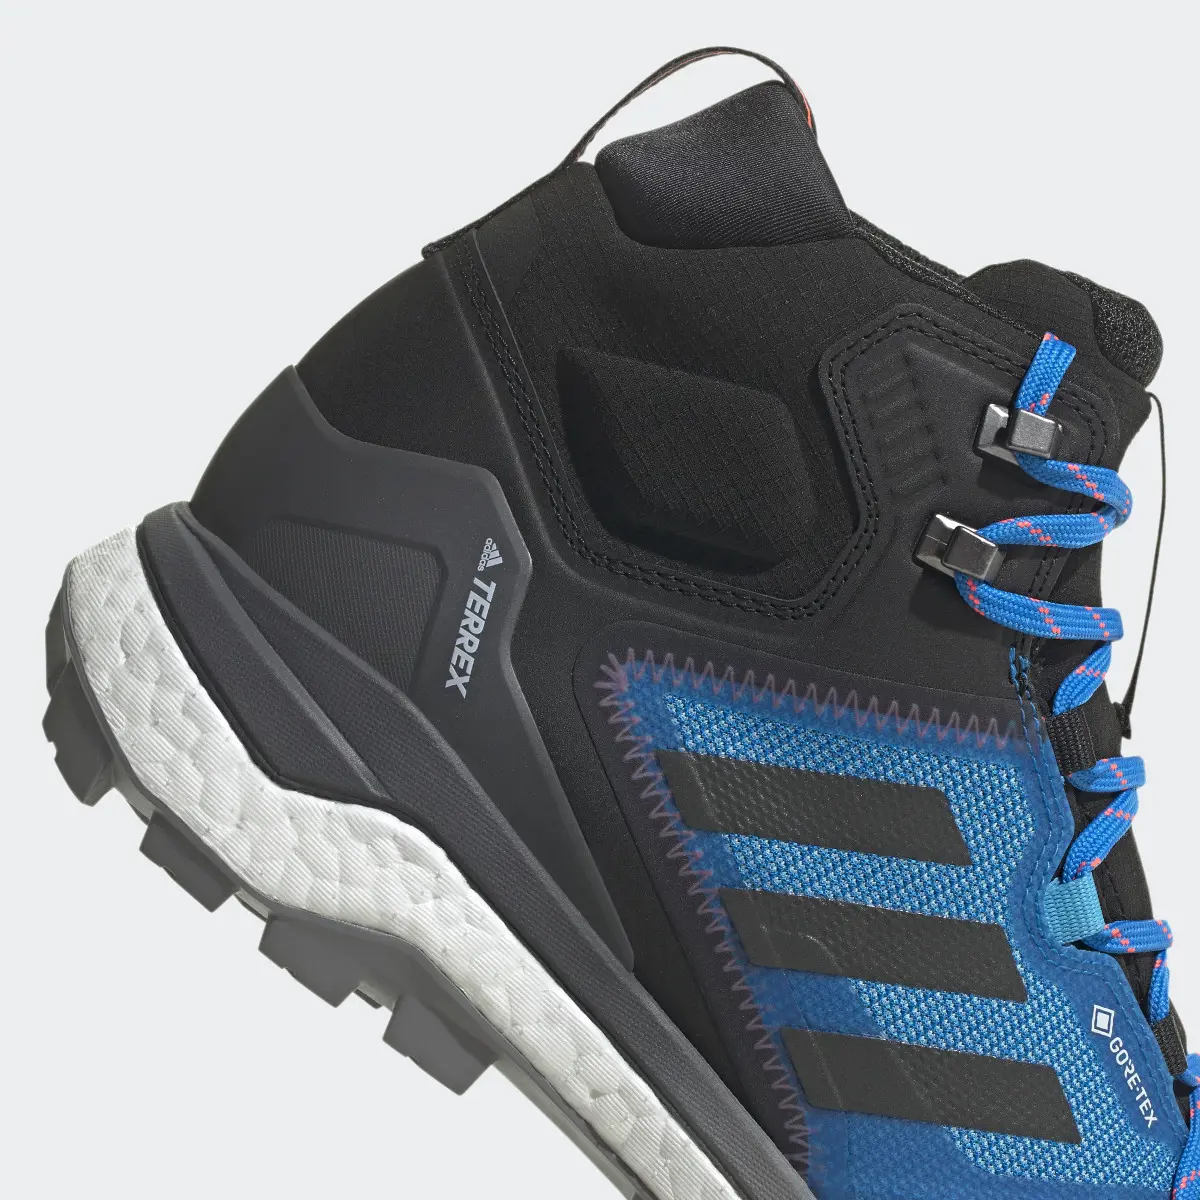 Adidas TERREX Skychaser 2 Mid GORE-TEX Hiking Shoes. 3